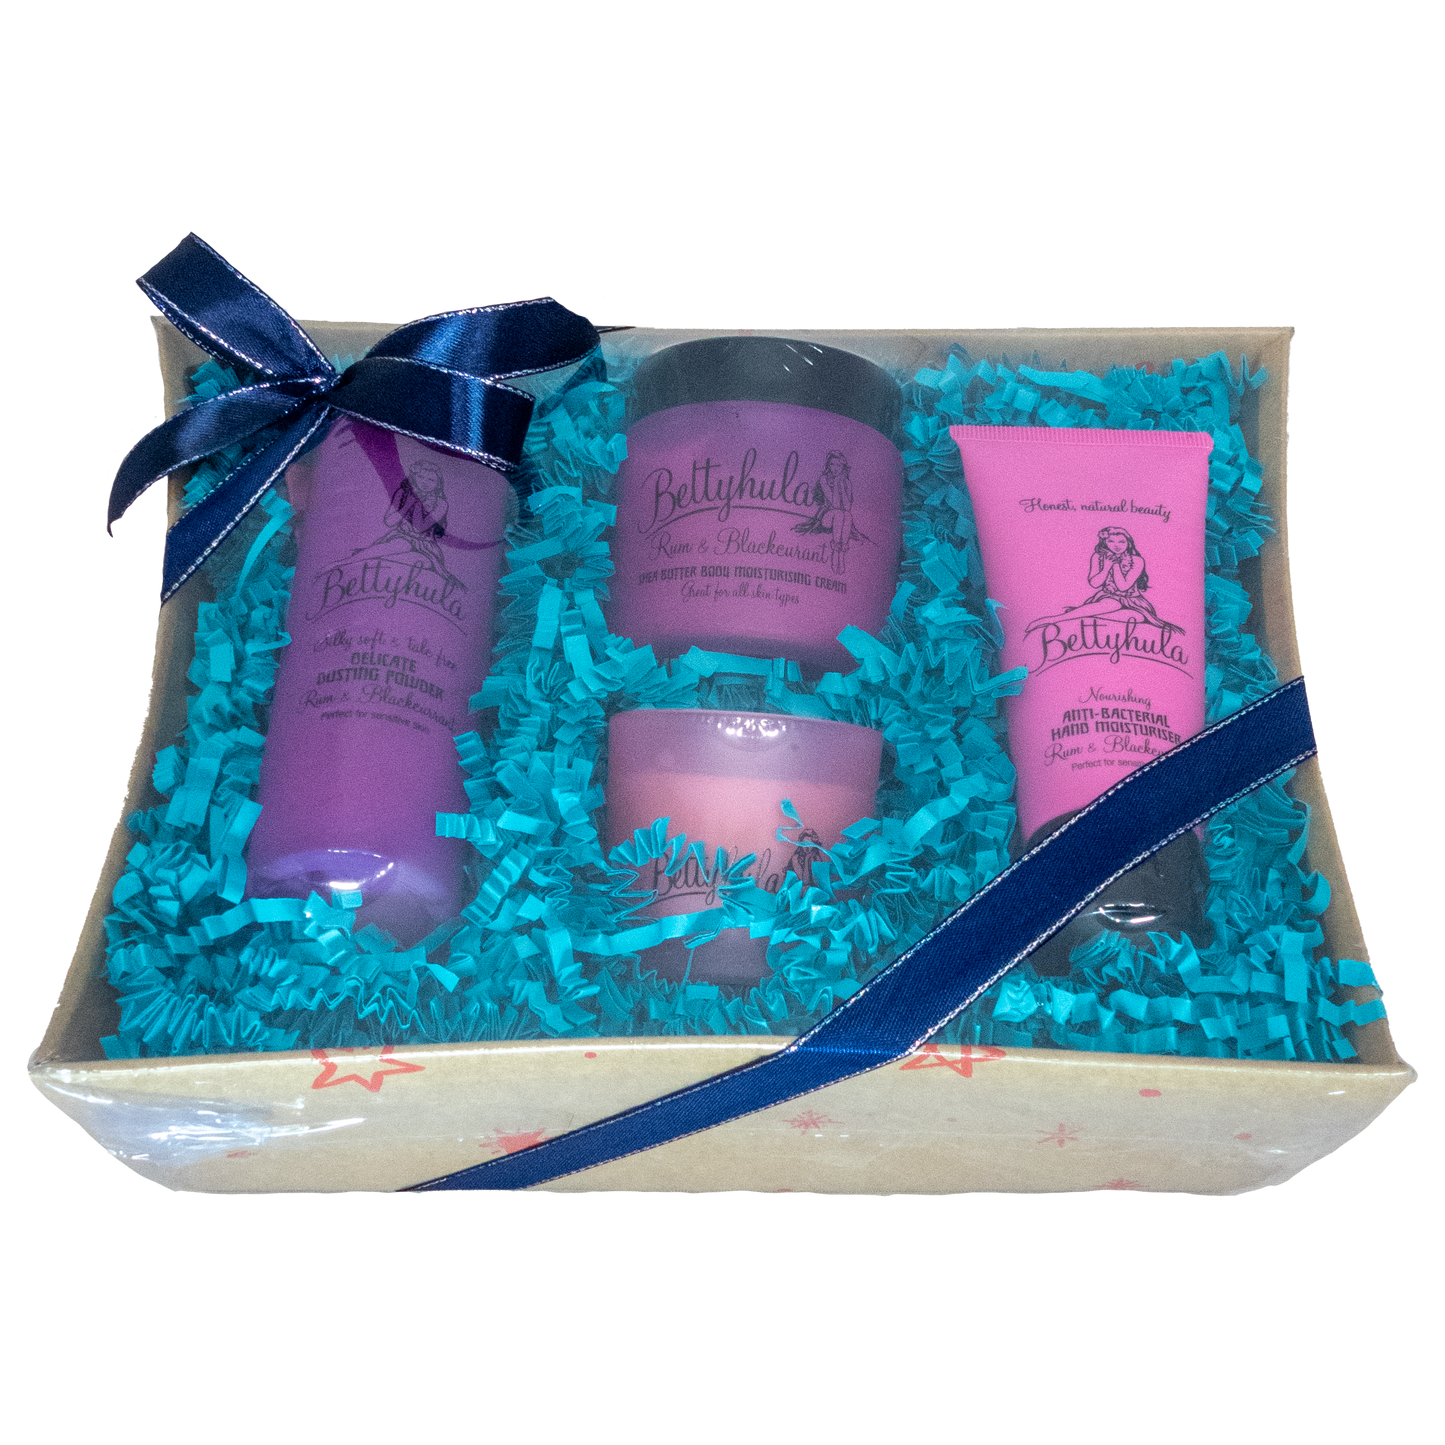 Love your Skin Giftset